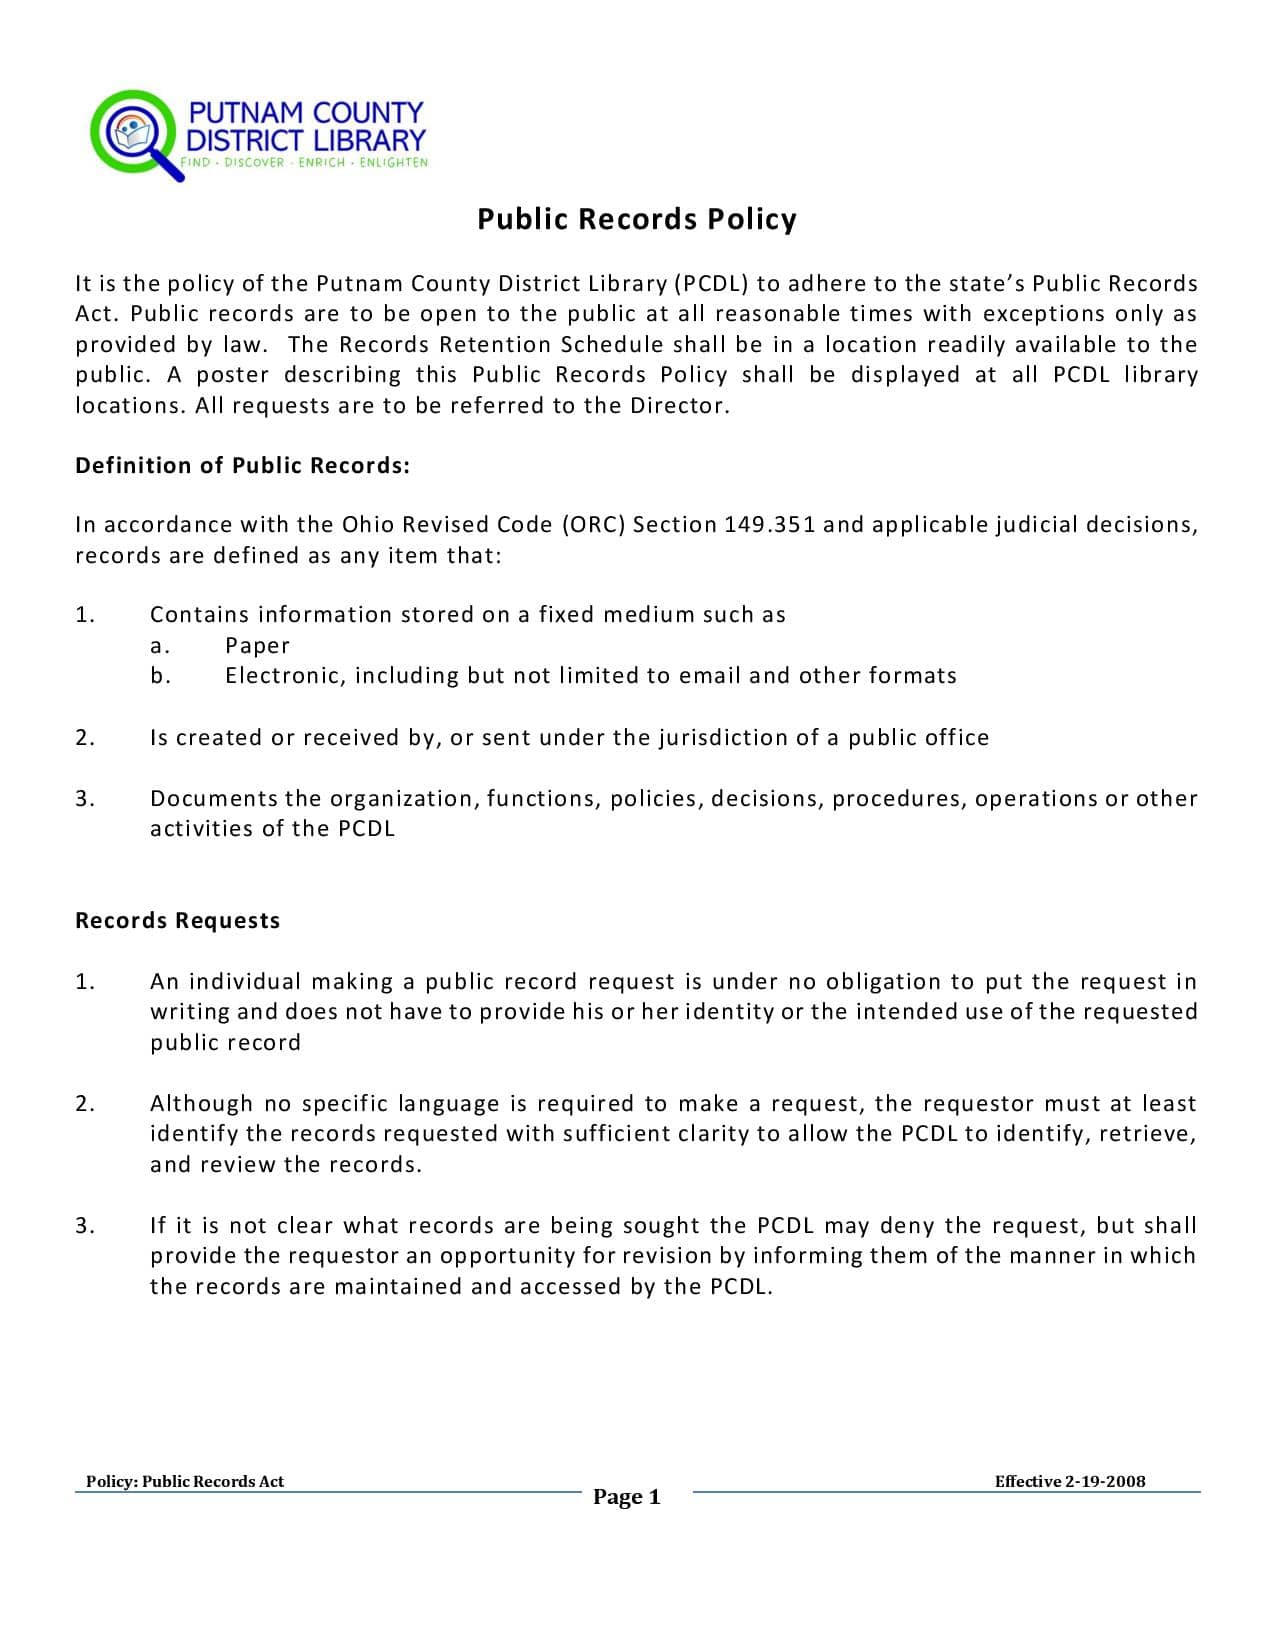 Public Records Policy Page 1